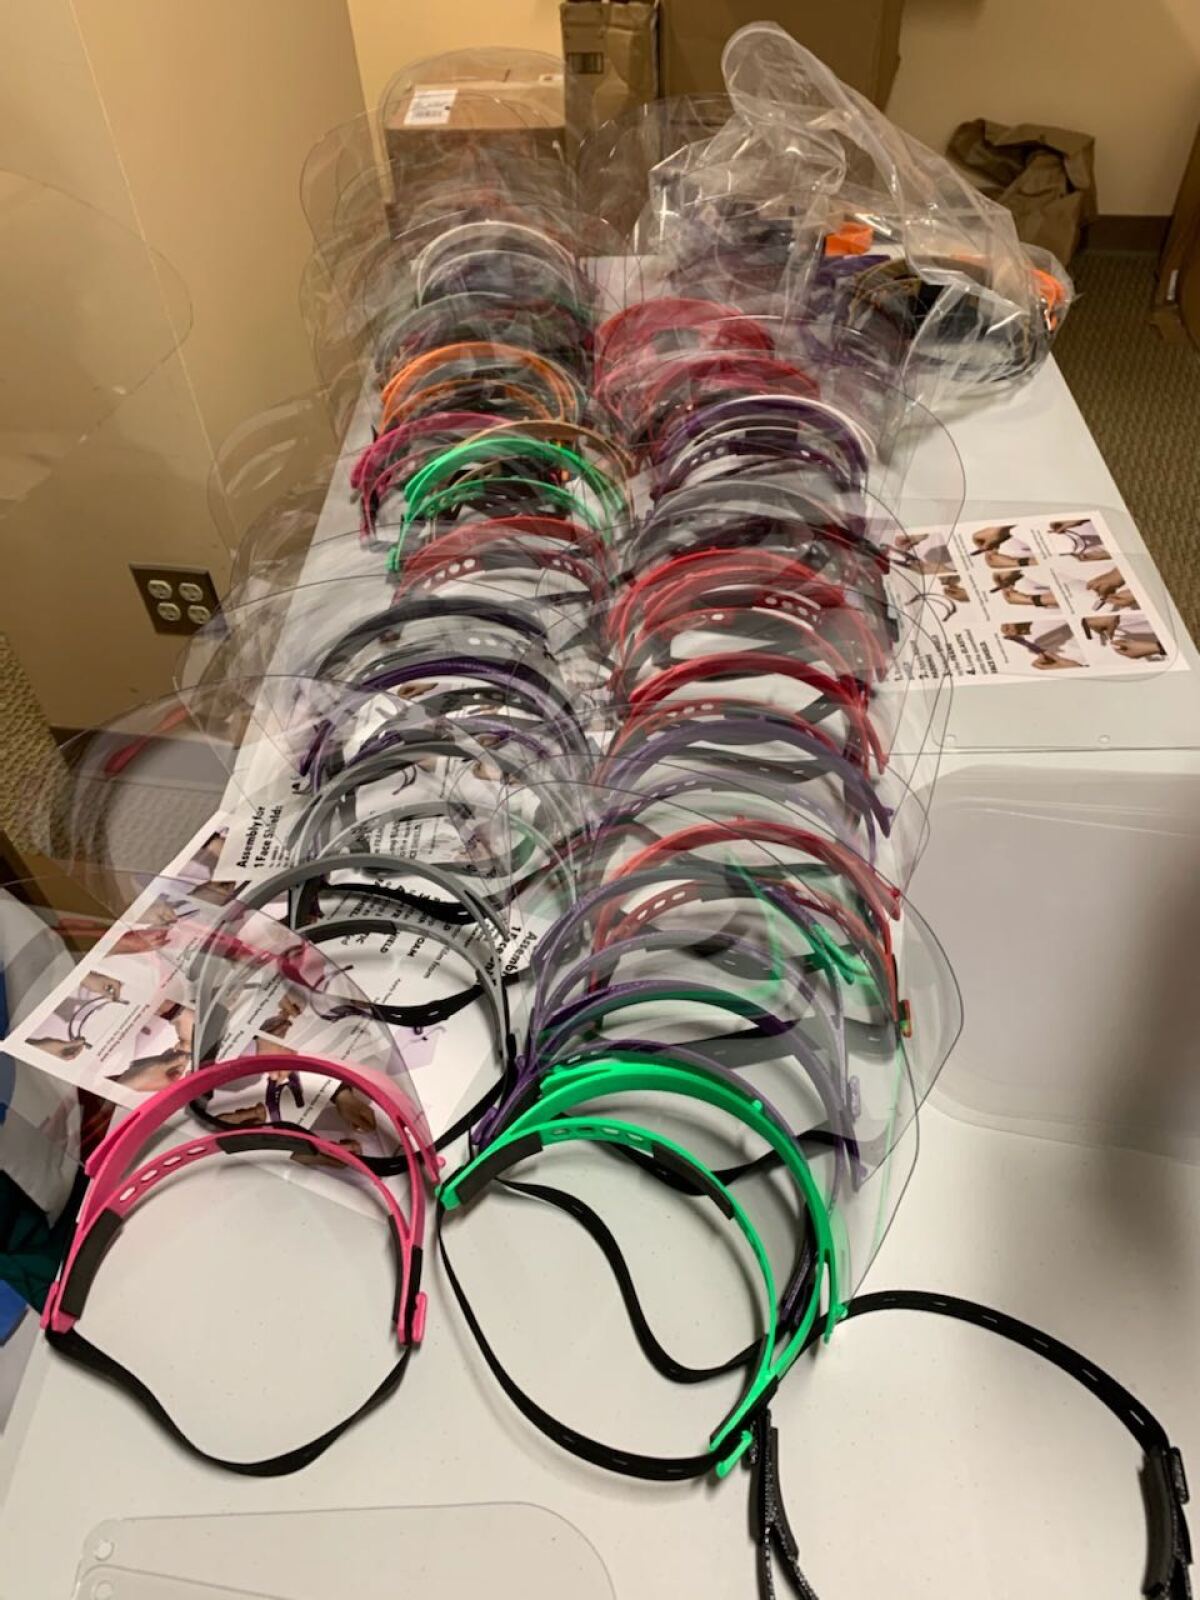 The protective masks New York Yankees' Giancarlo Stanton is donating comes in variety of colors.